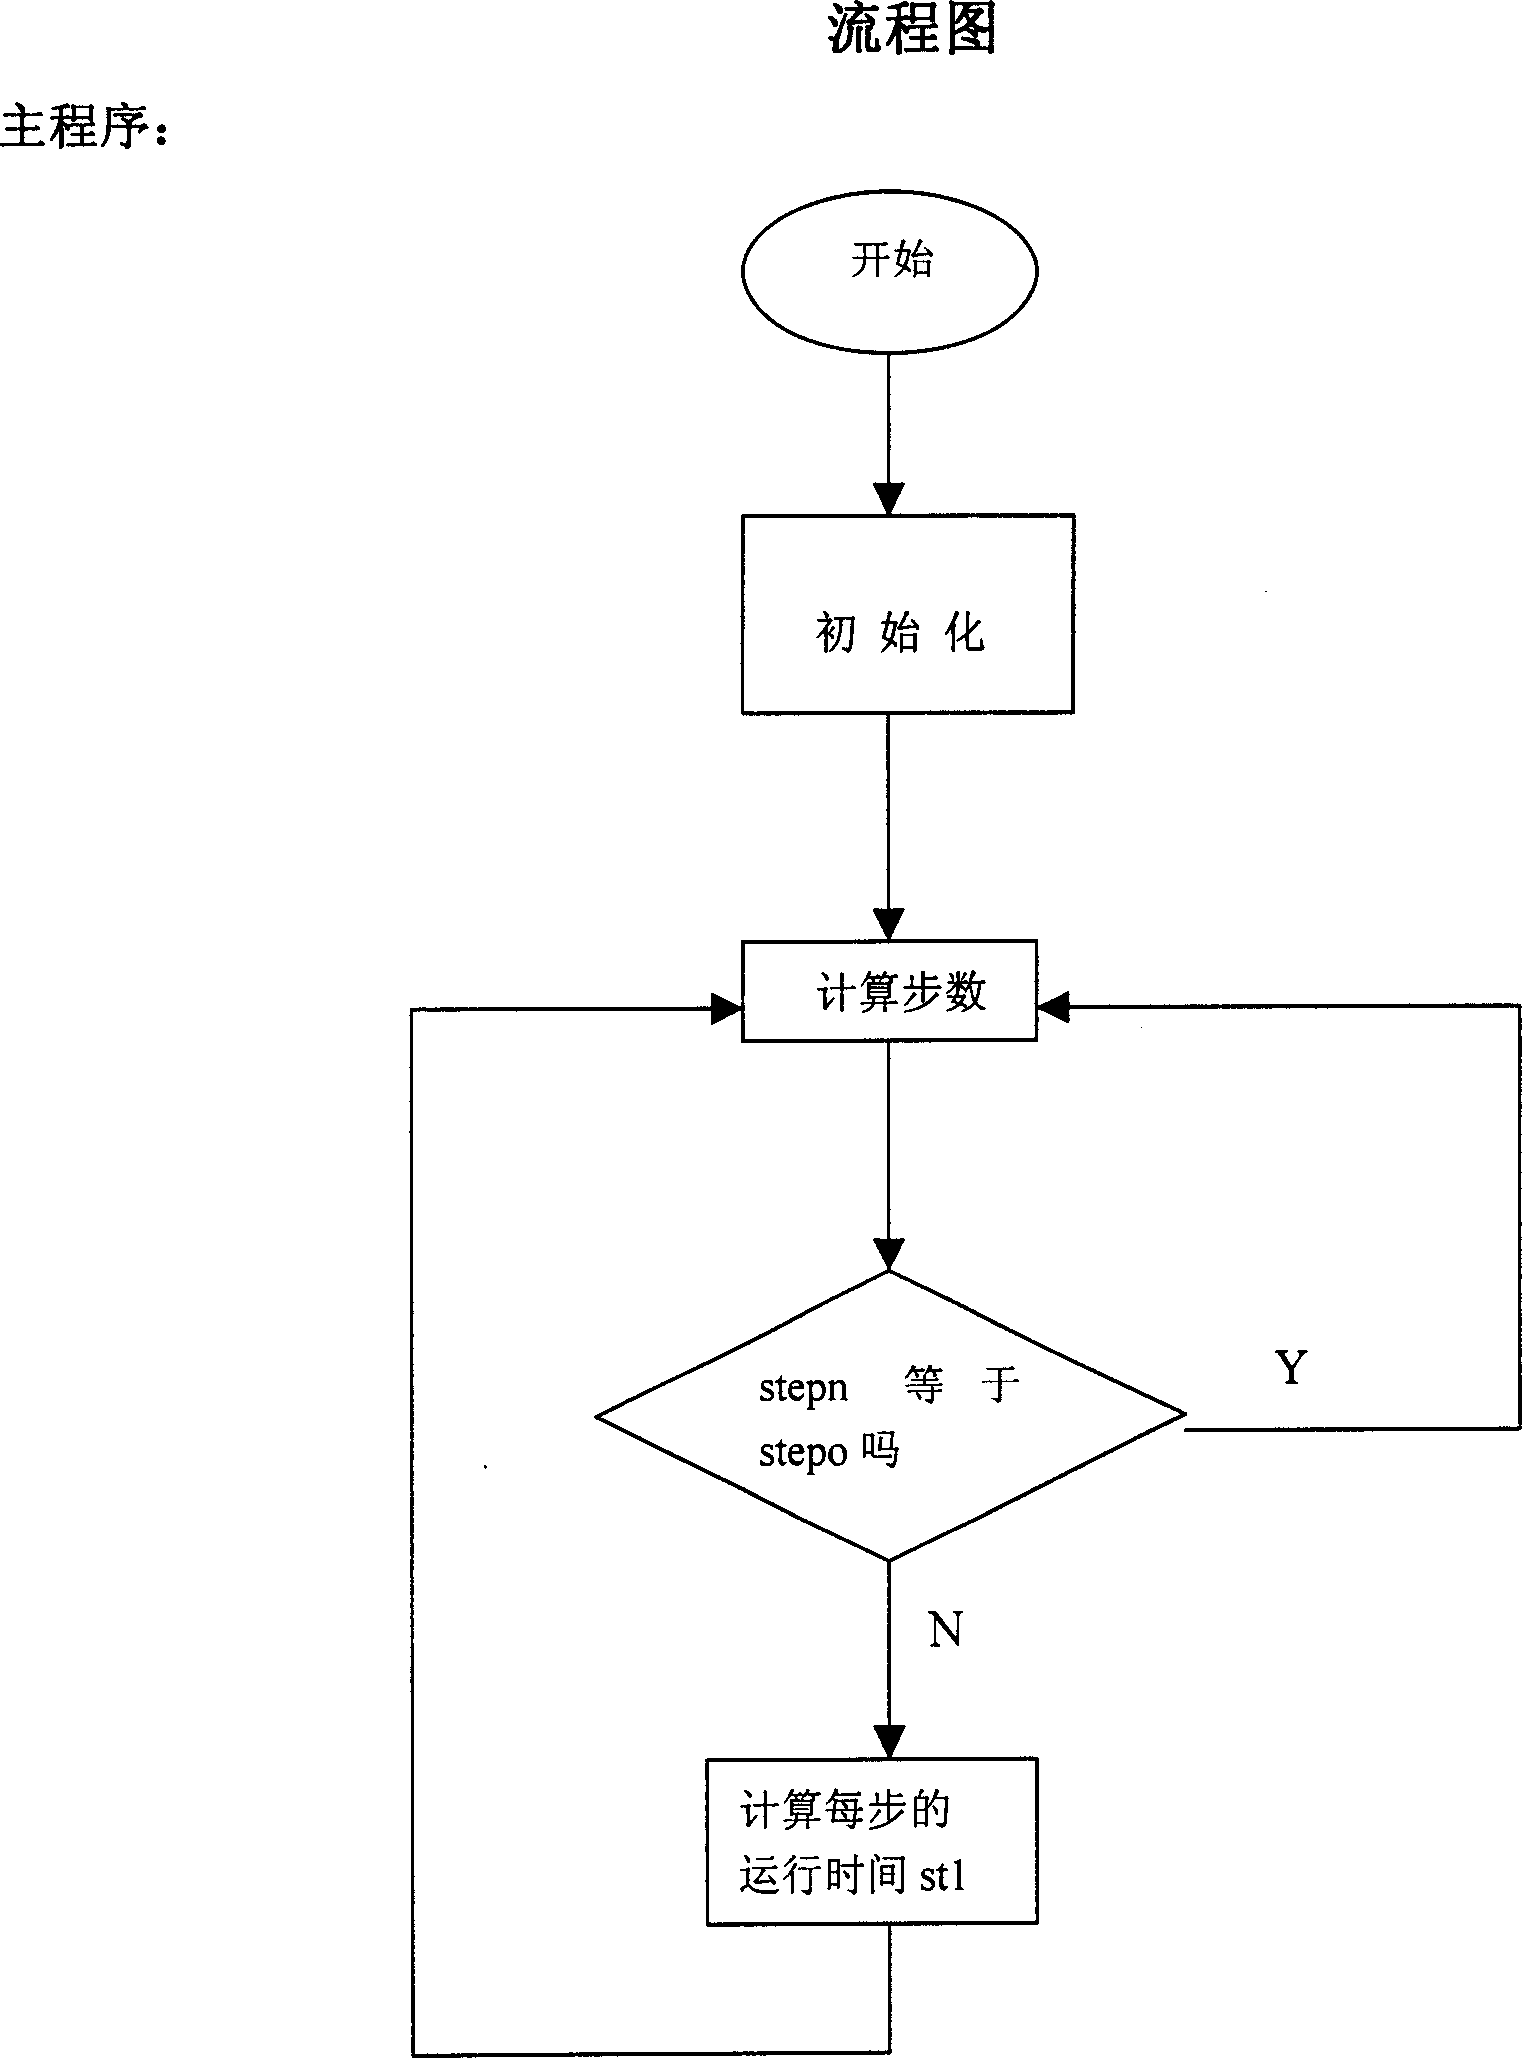 Assembled instrument step motor controller of vehicle and control mode thereof